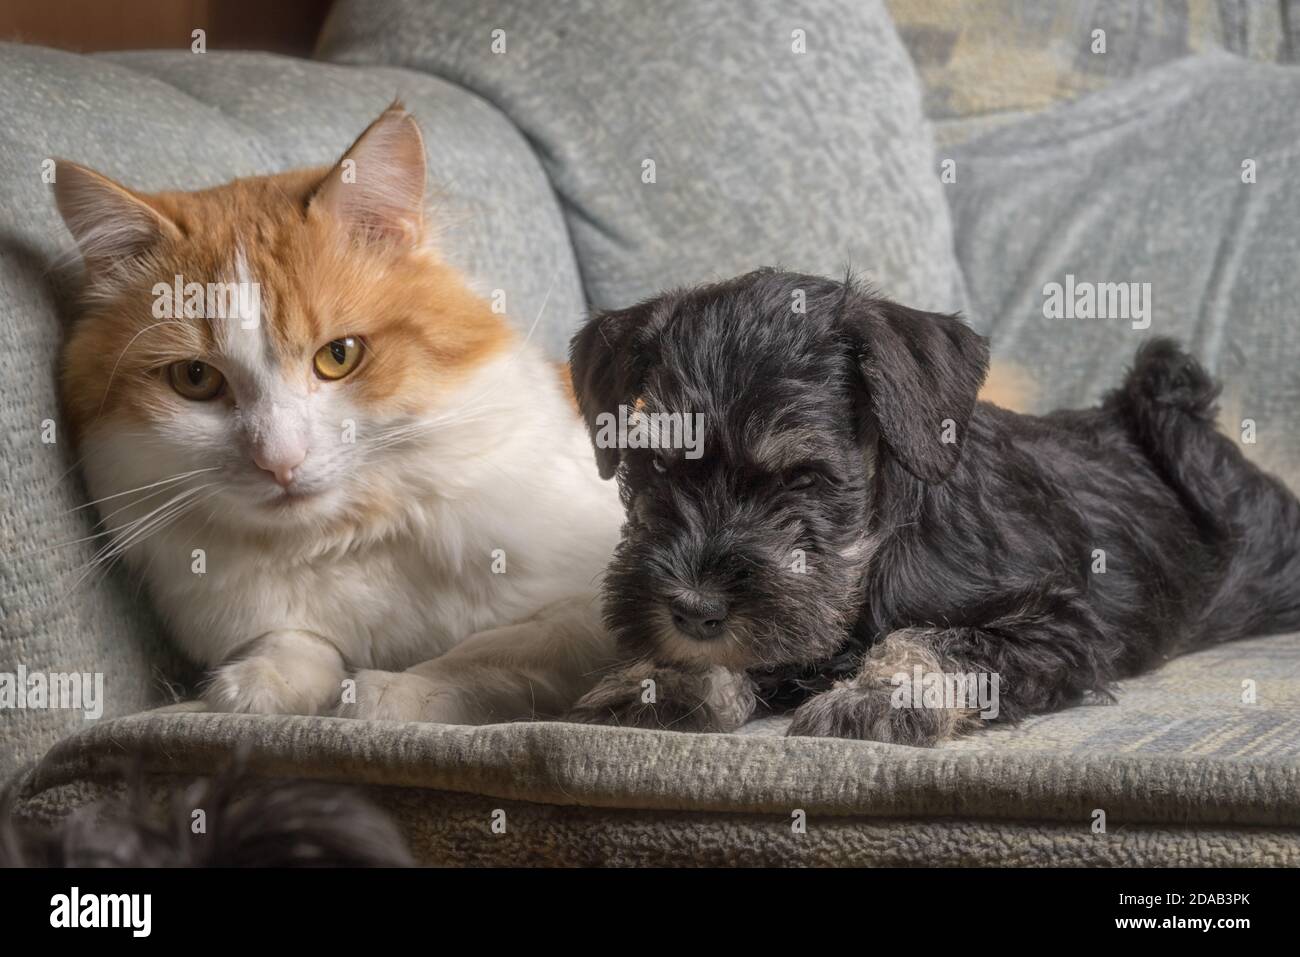 Cat and puppy laying together on a sofa. Stock Photo